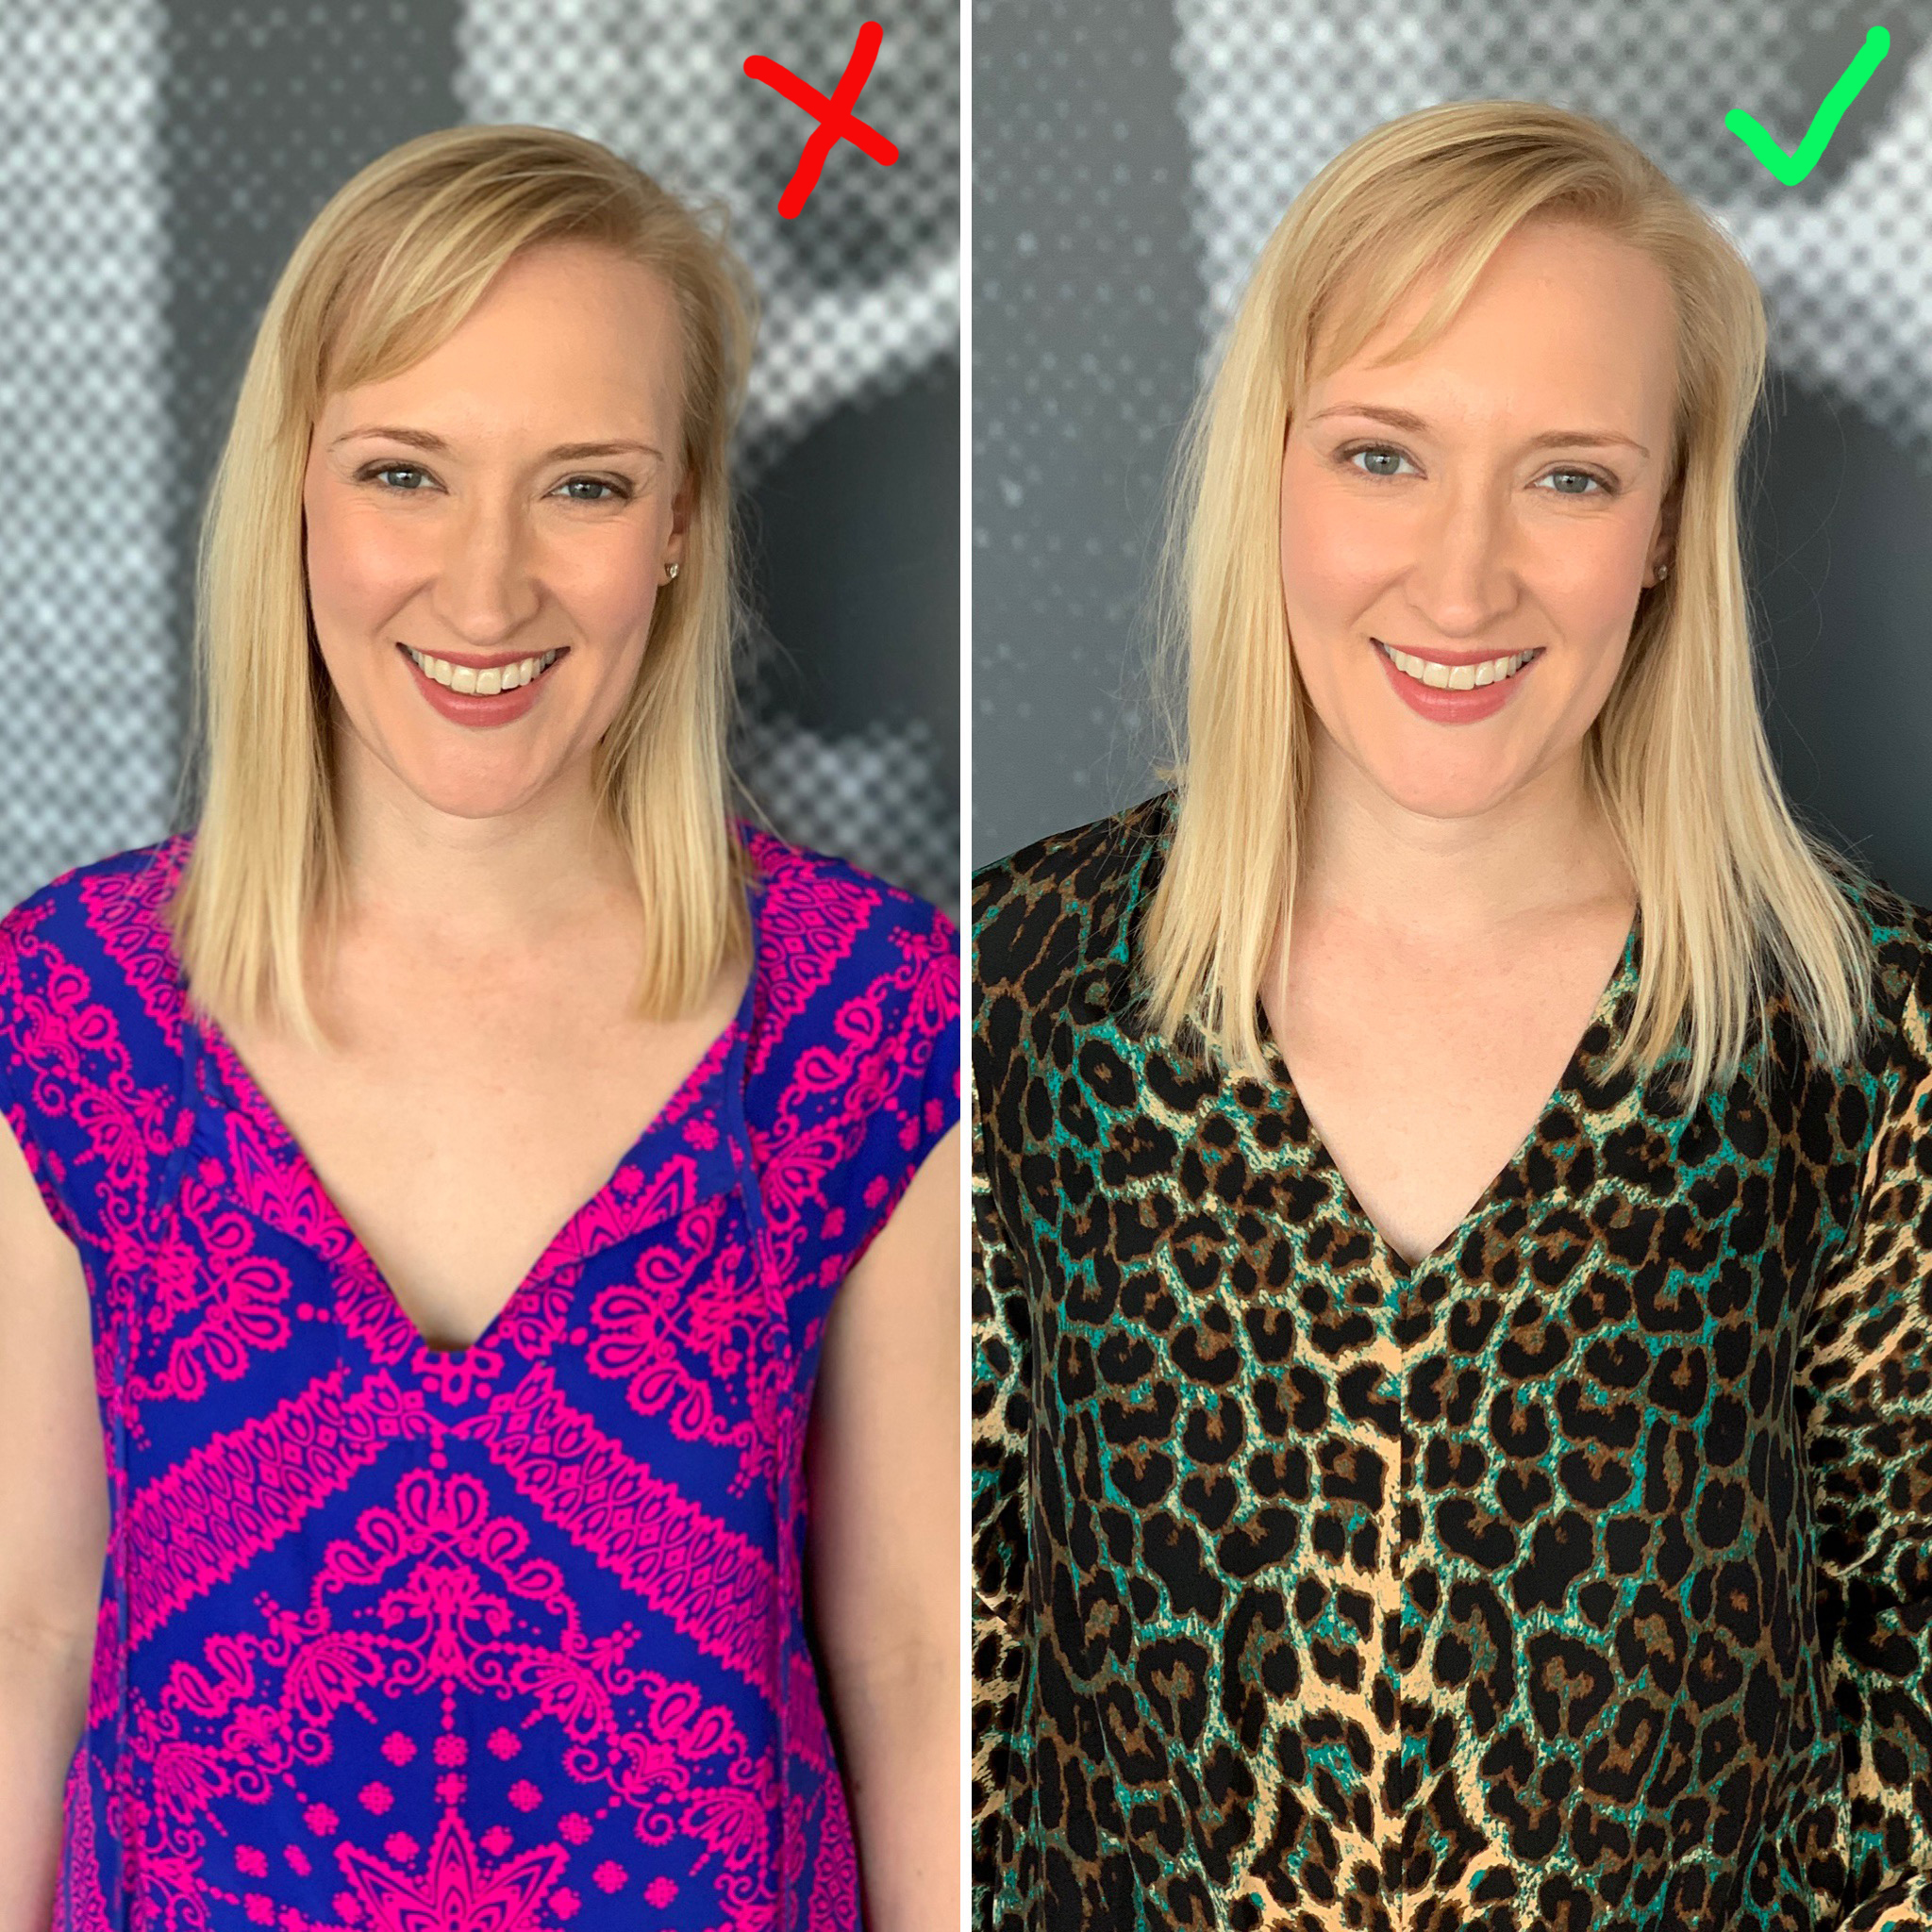 What to wear for professional headshots, avoid bright neon colors and bold prints 